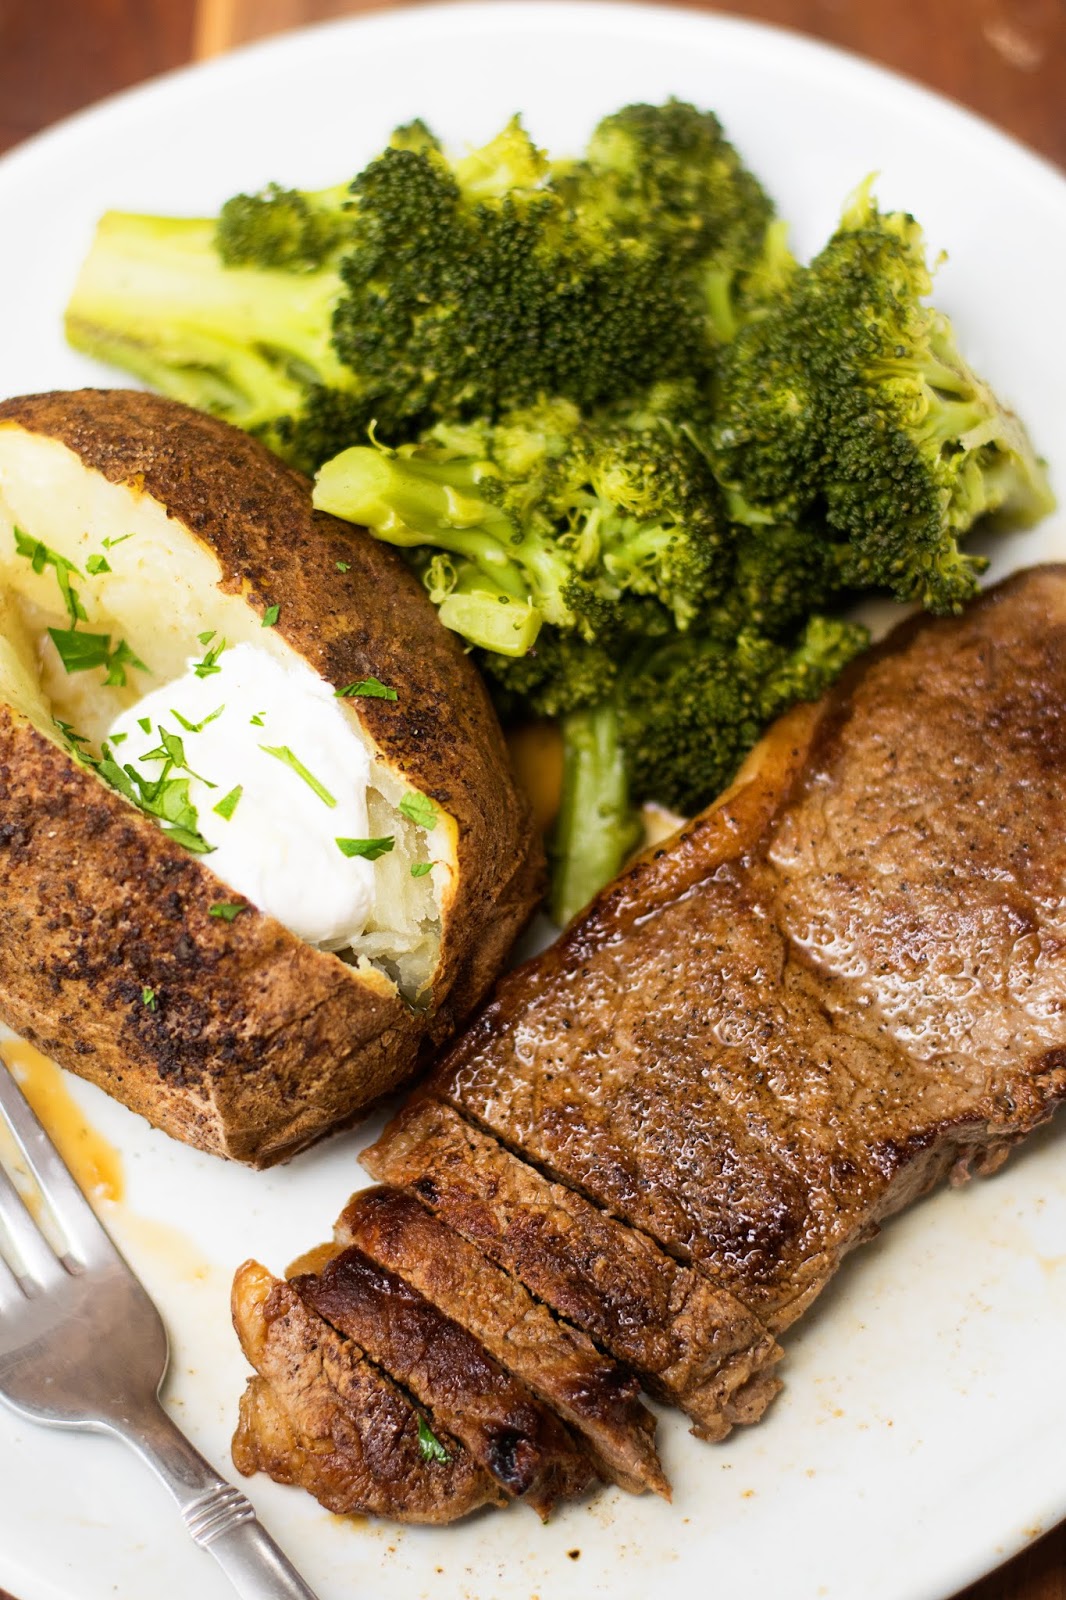 Steak Pan Seared- Medium Well You Will Love This Taste And Perfect